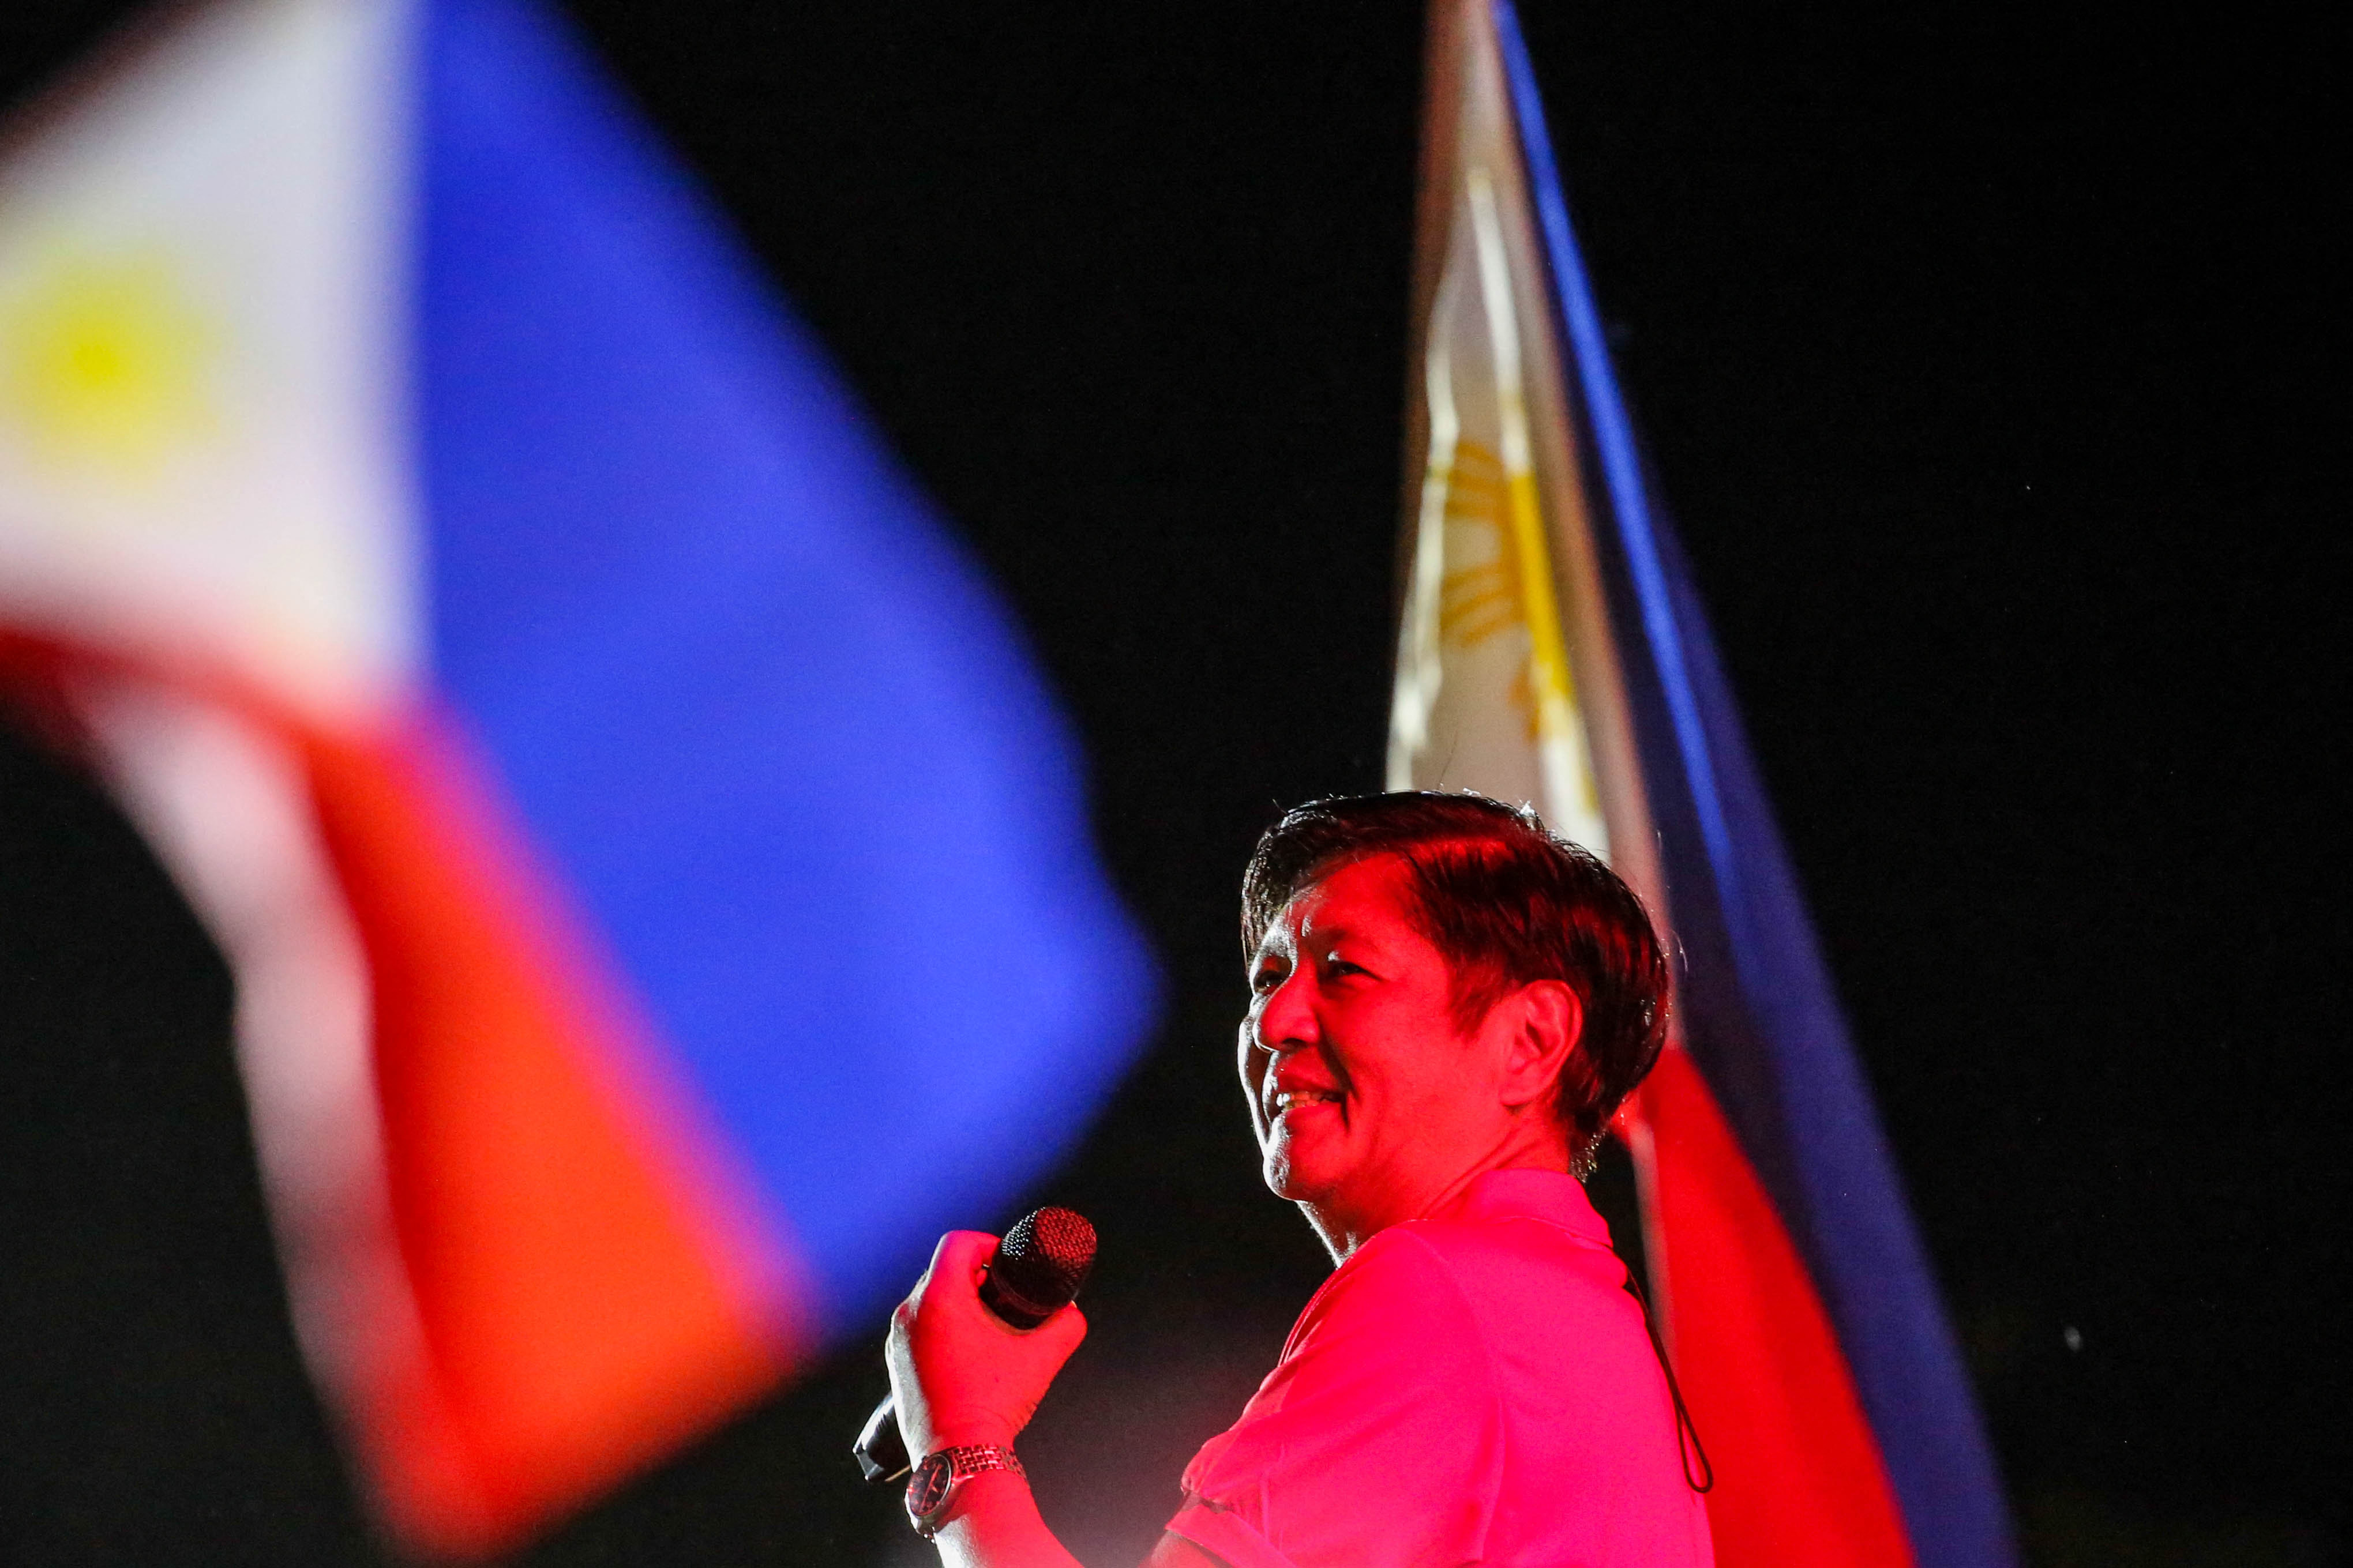 Presidential candidate Ferdinand Marcos Jr. at a campaign rally in Manila,&nbsp;on April 24, ahead of the presidential election on May 9.&nbsp;